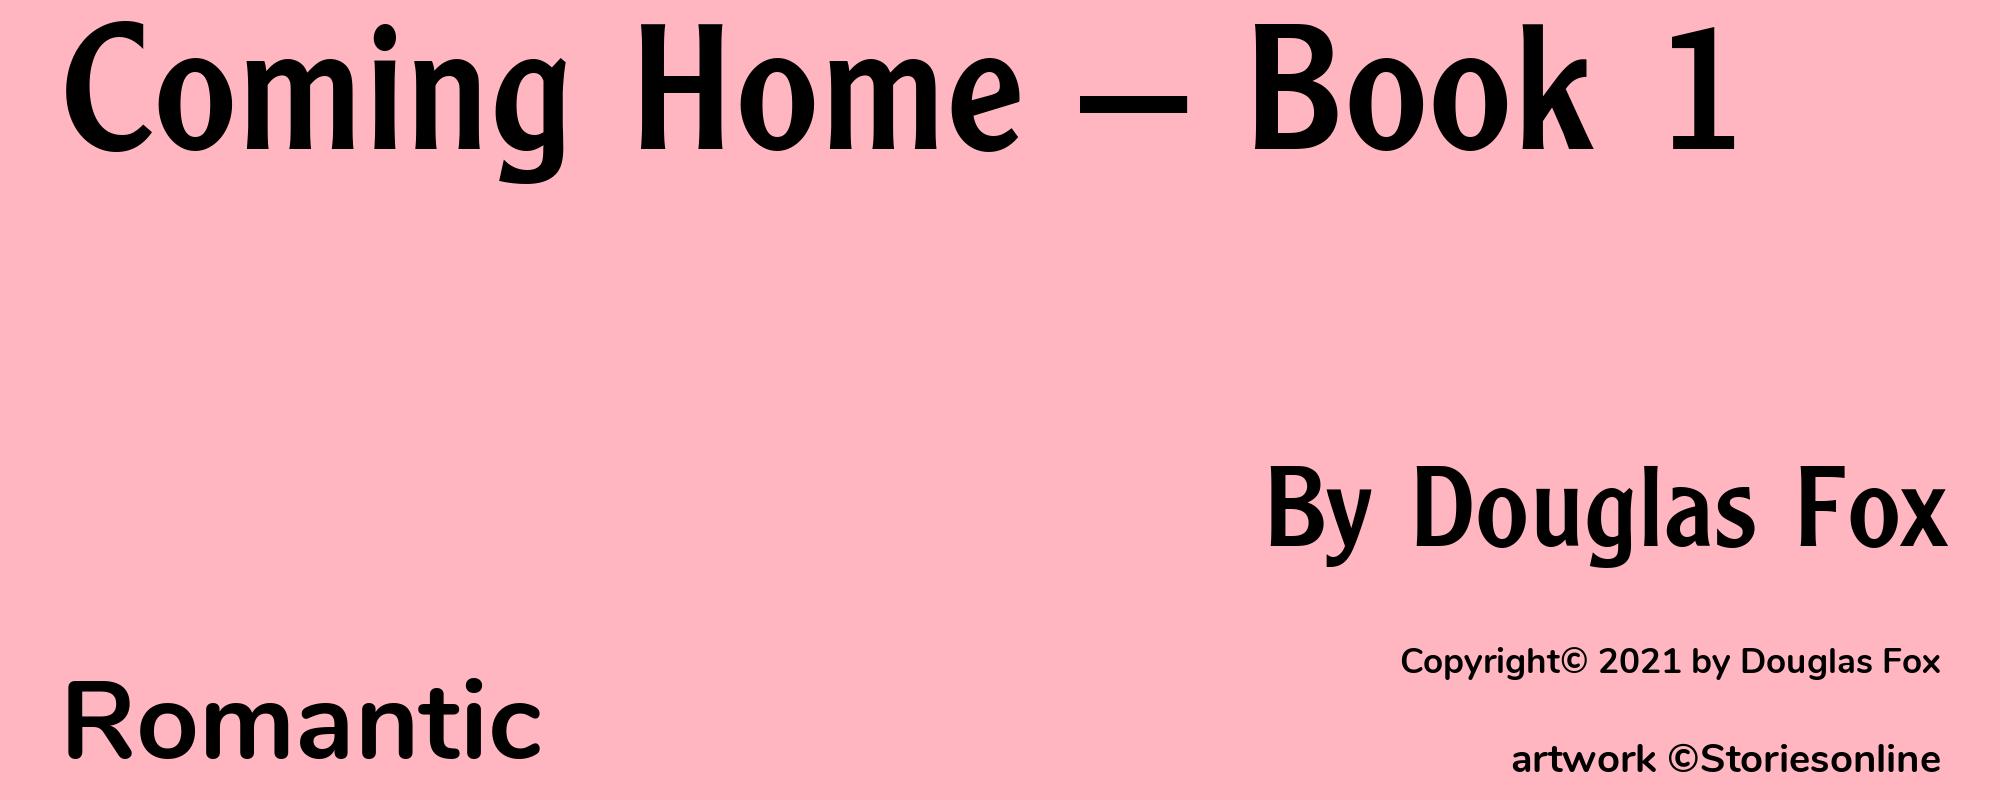 Coming Home — Book 1 - Cover